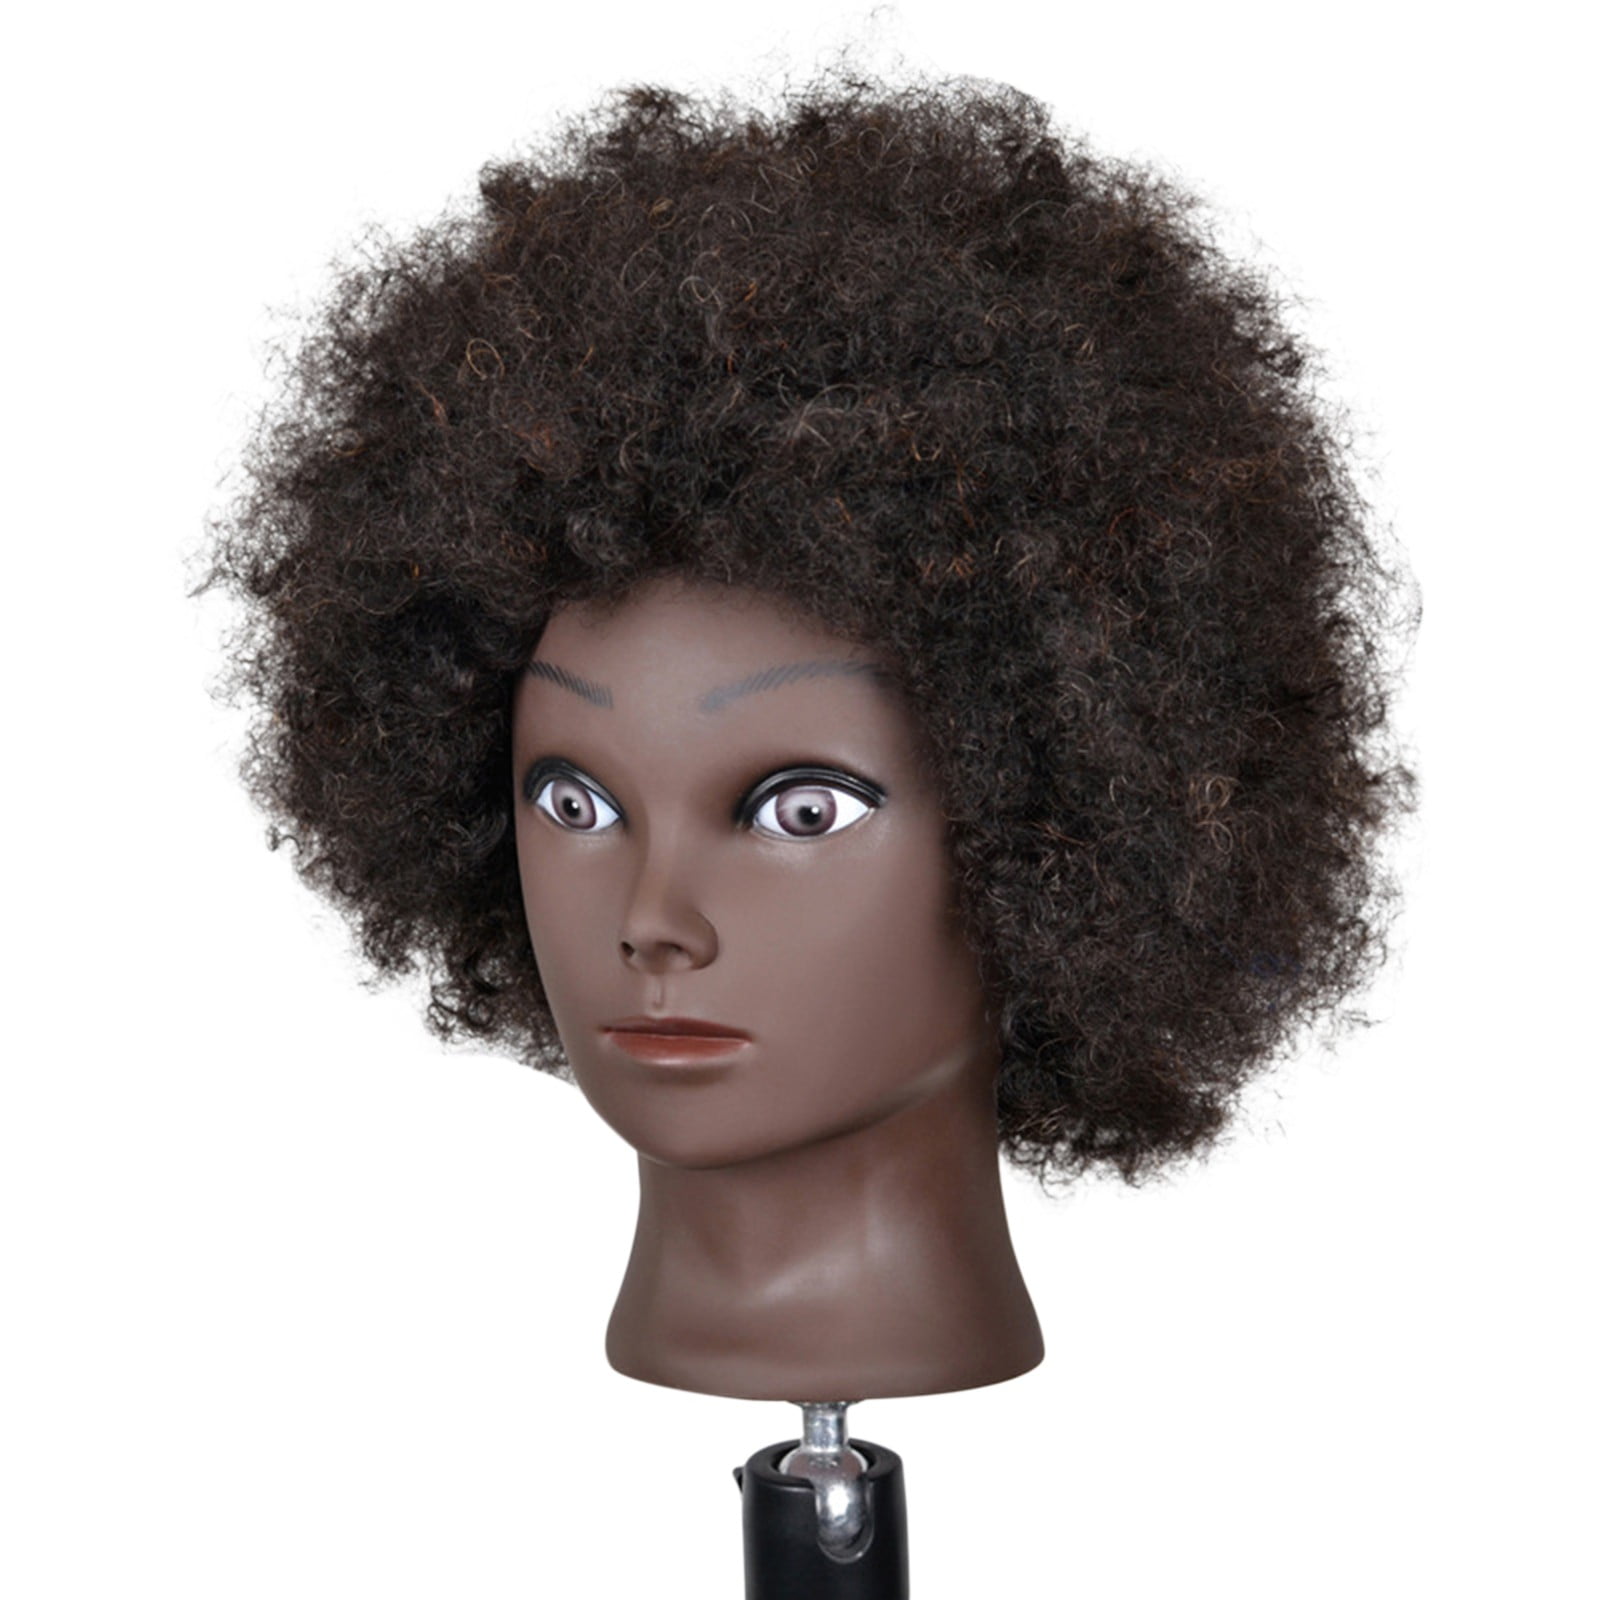 PARTYSAVING Mannequin Head Stand Clamp for Wig Making, 1 Pack